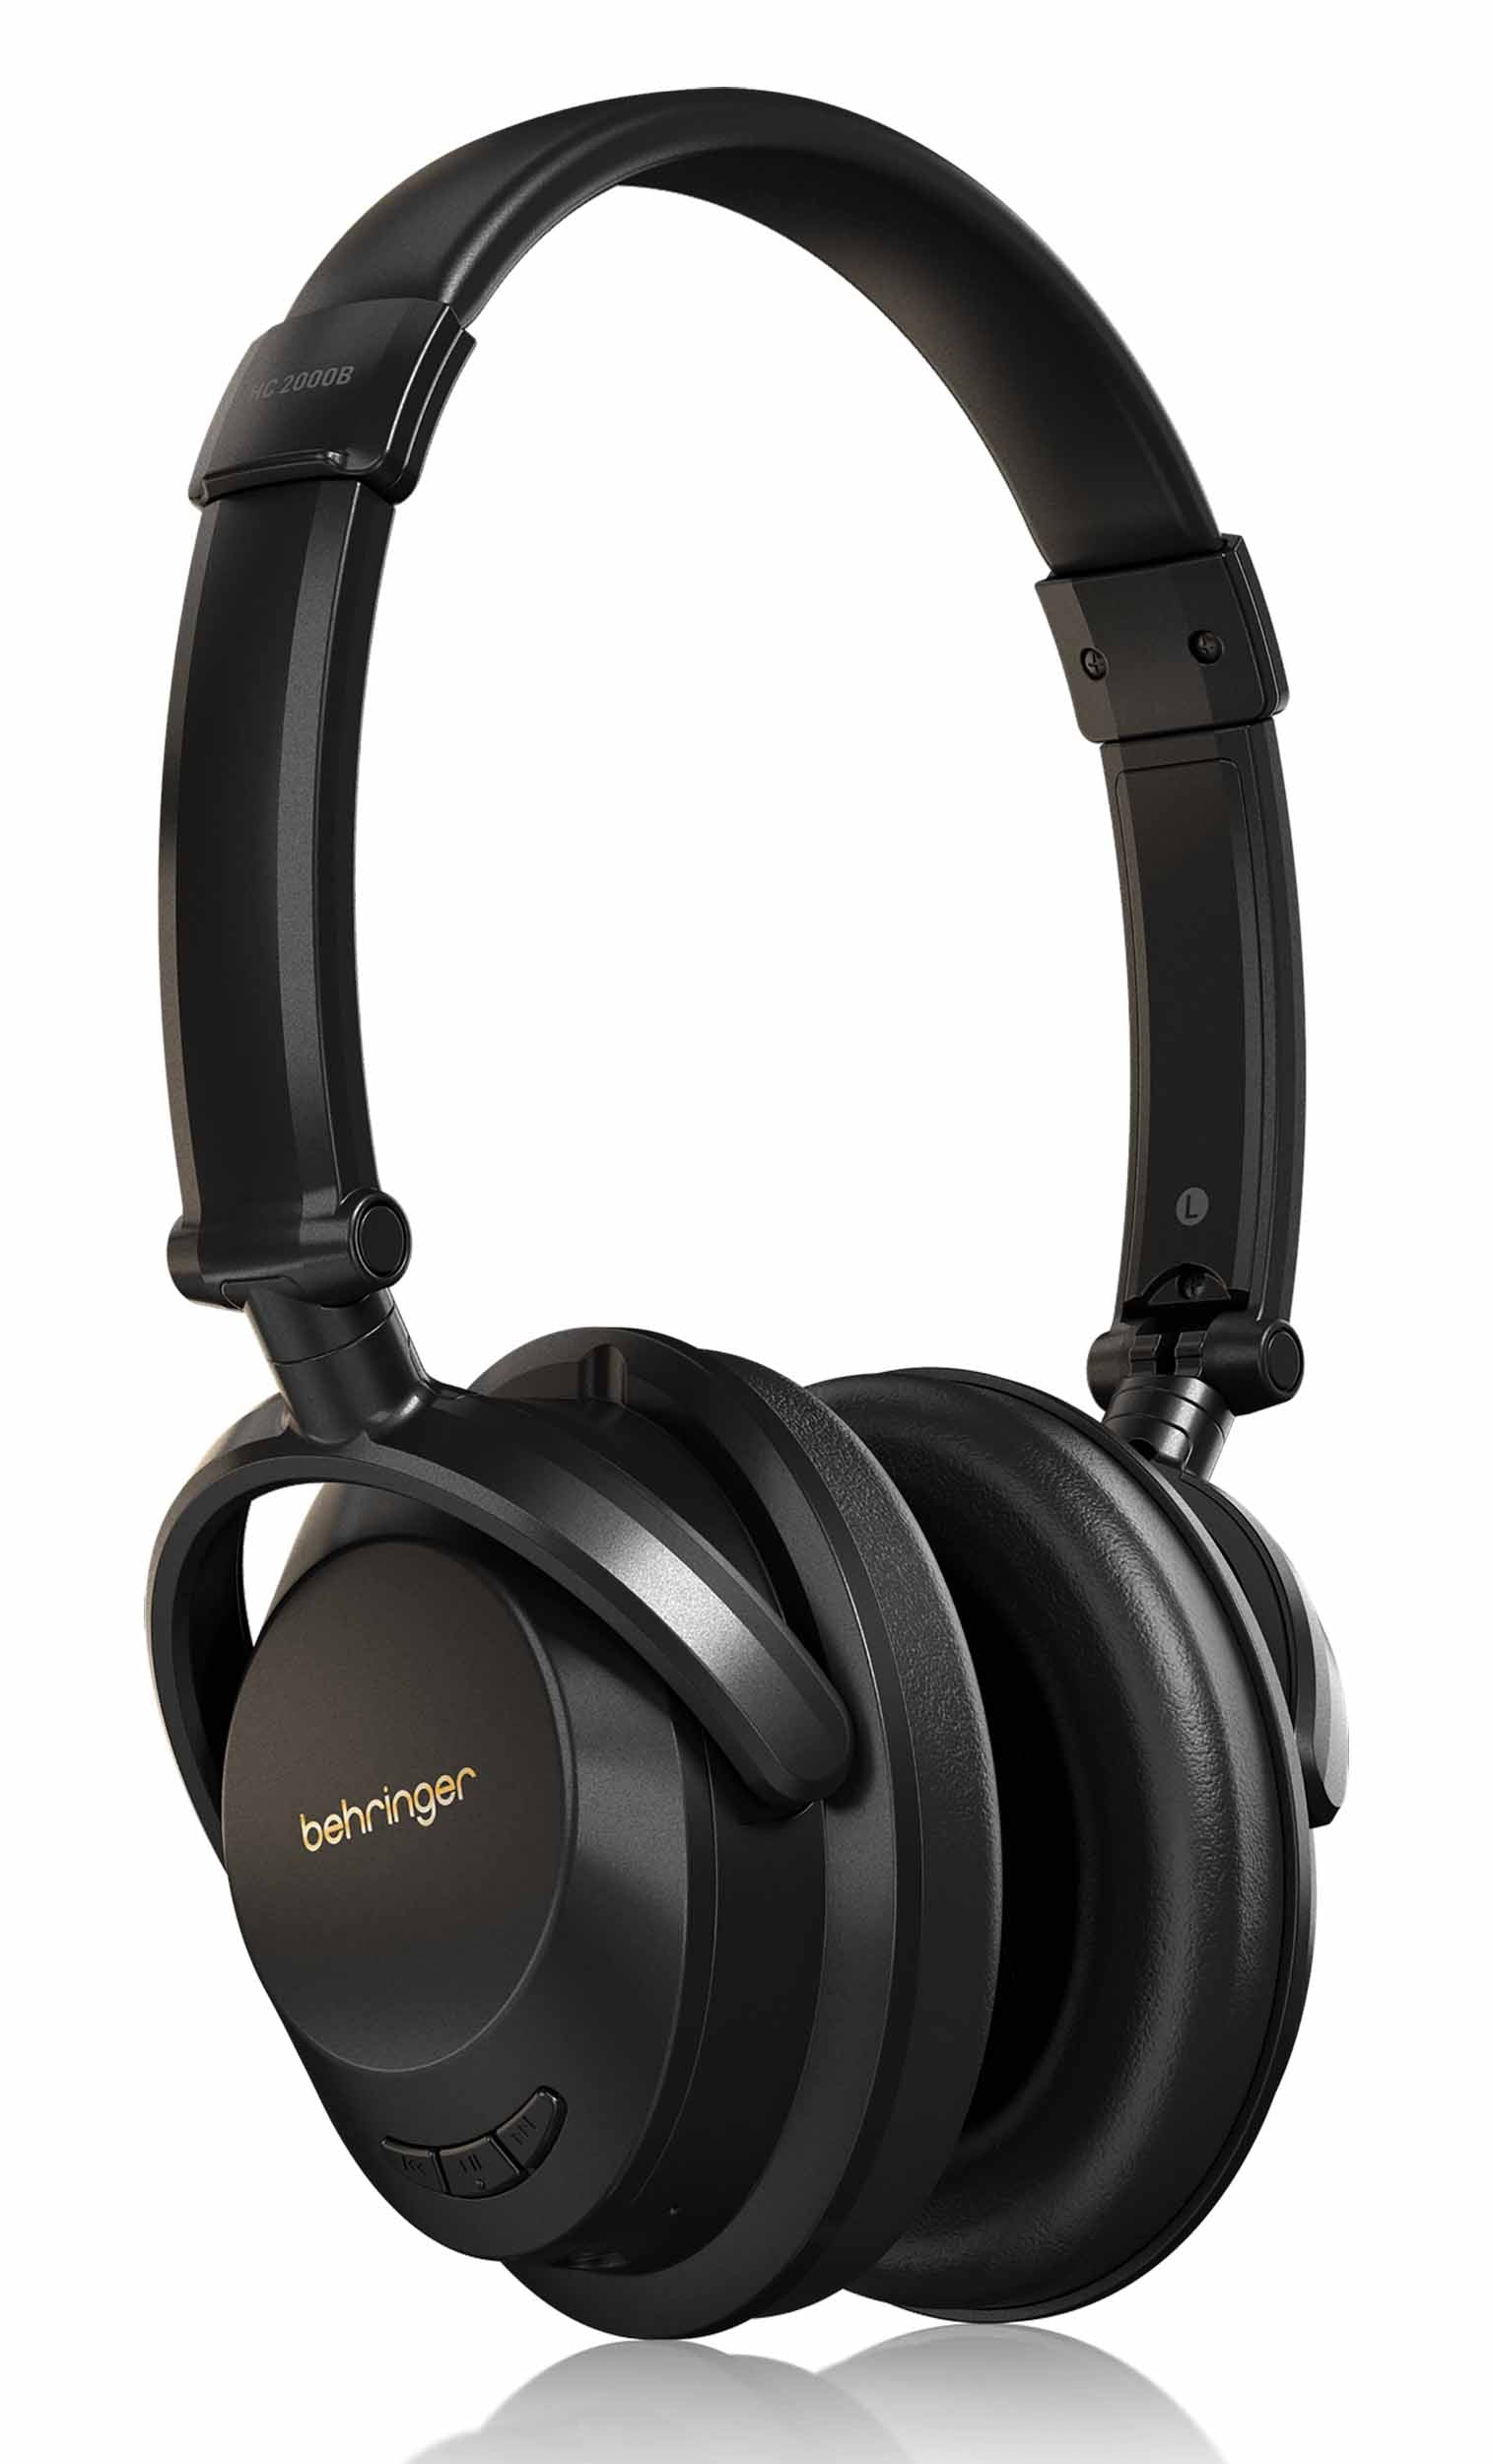 Behringer HC 2000B Studio-Quality Wireless Headphones with Bluetooth Connectivity by Behringer